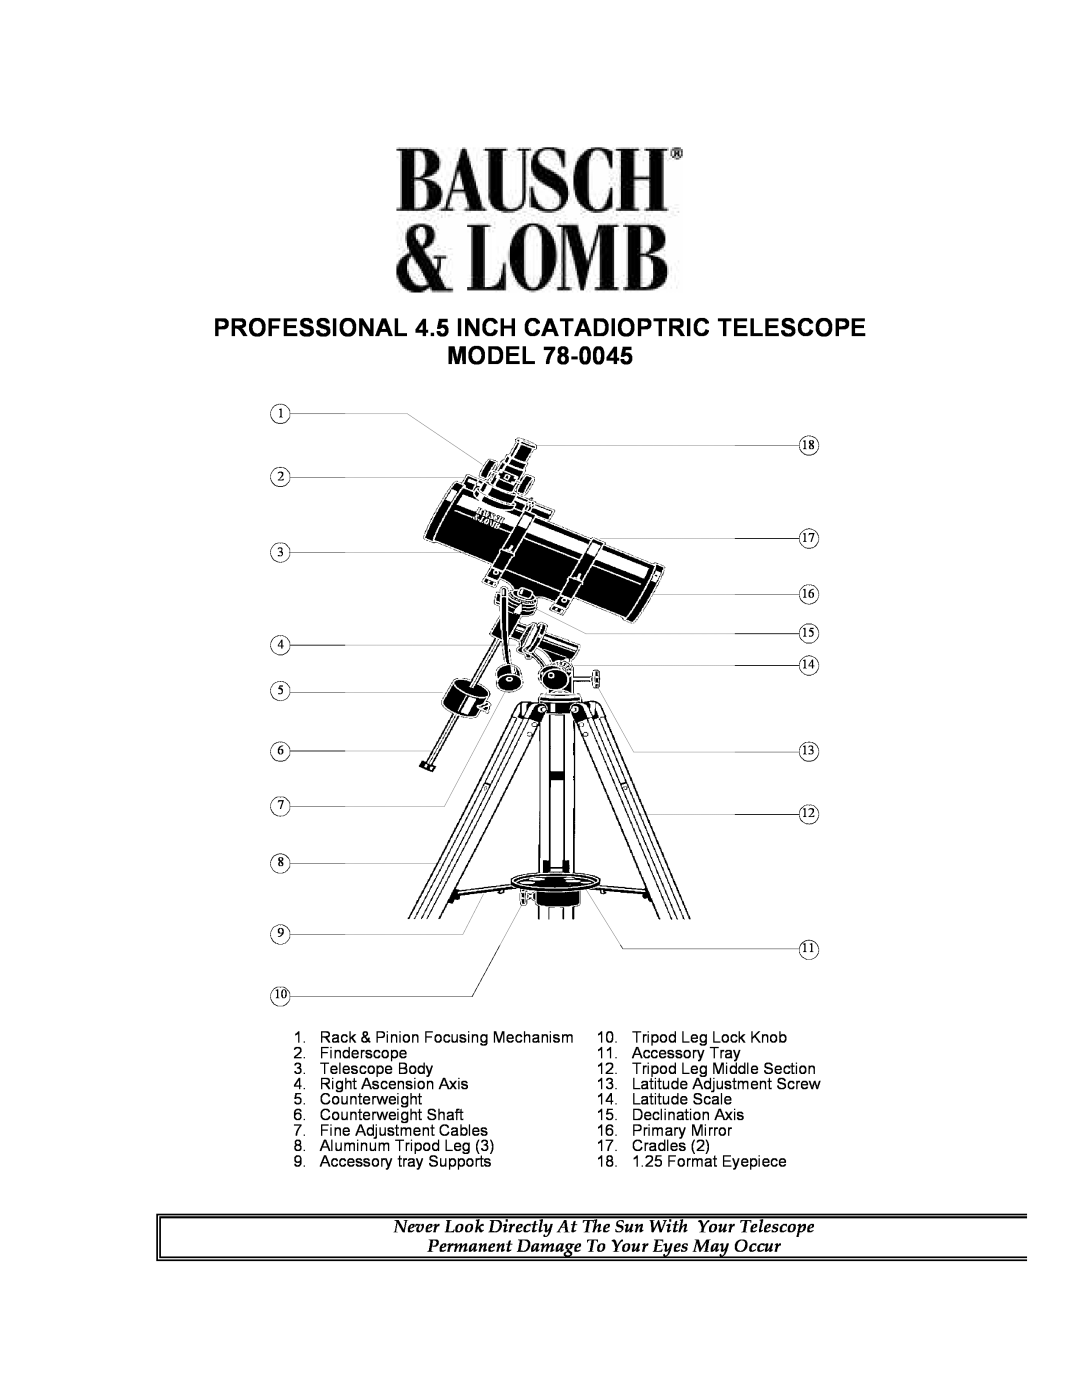 Bausch & Lomb 78-0045 manual PROFESSIONAL 4.5 INCH CATADIOPTRIC TELESCOPE MODEL, Permanent Damage To Your Eyes May Occur 